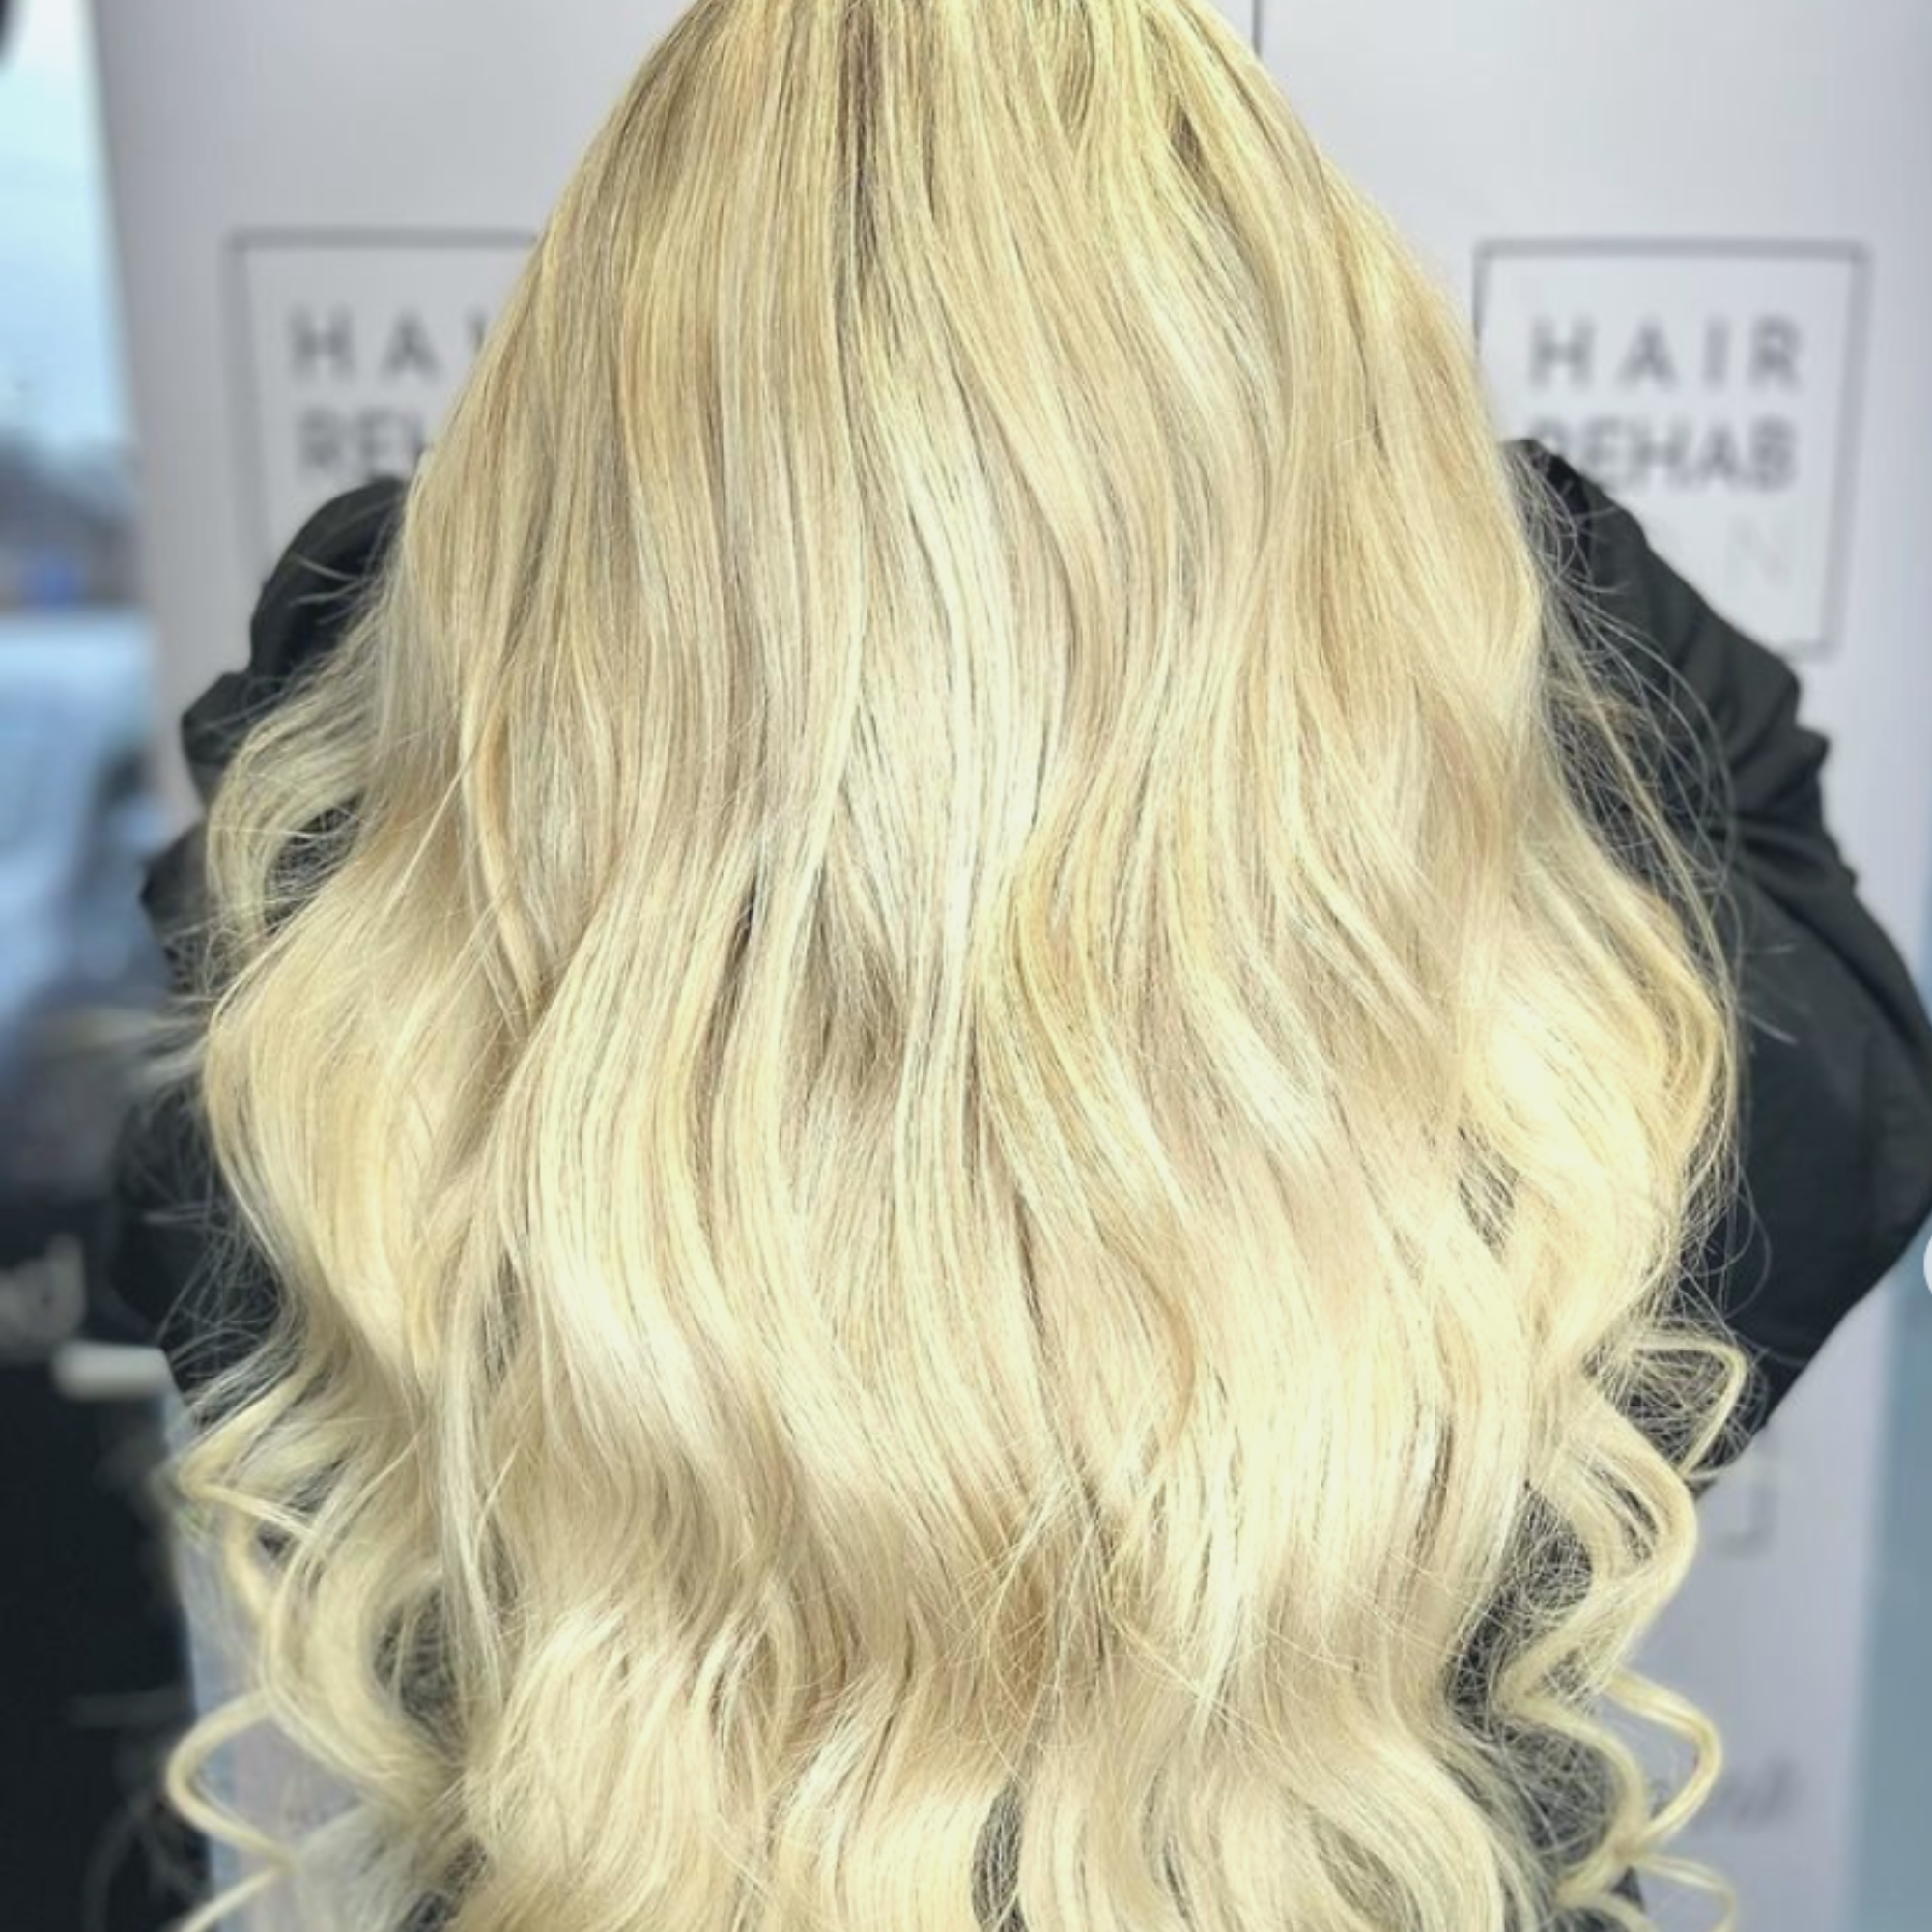 "hair rehab london 18" weft hair extensions shade swatch titled platinum"